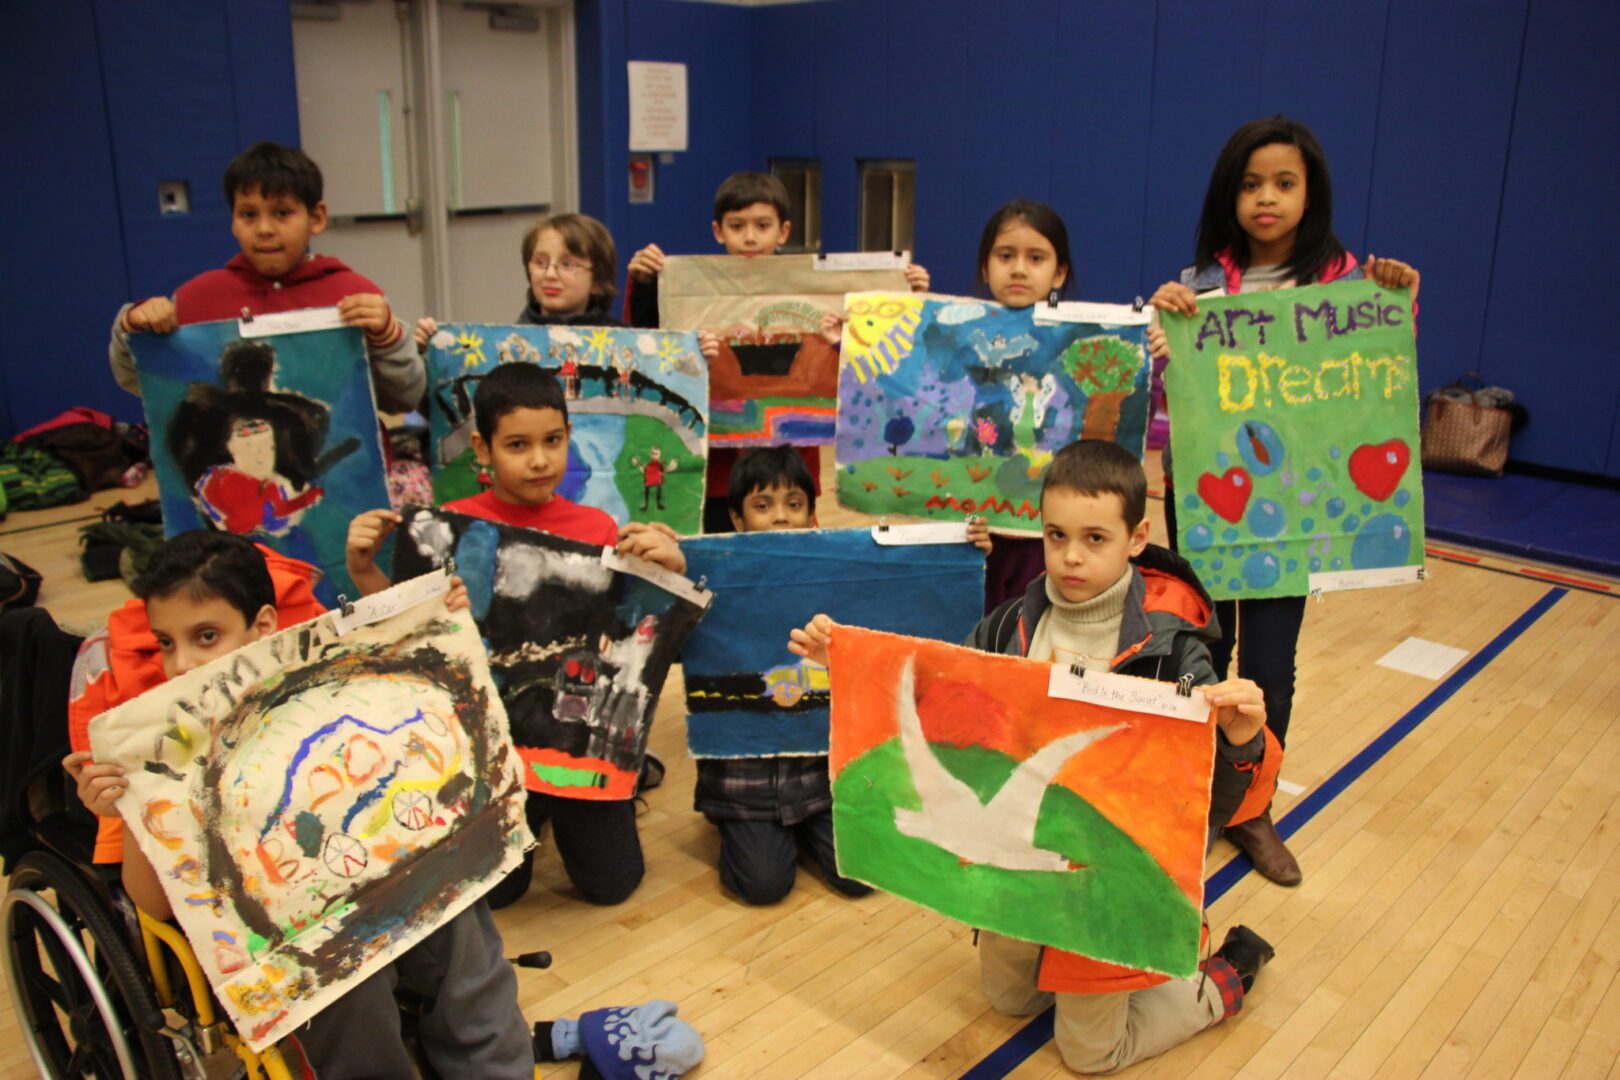 A group of children holding up artwork in a gym.